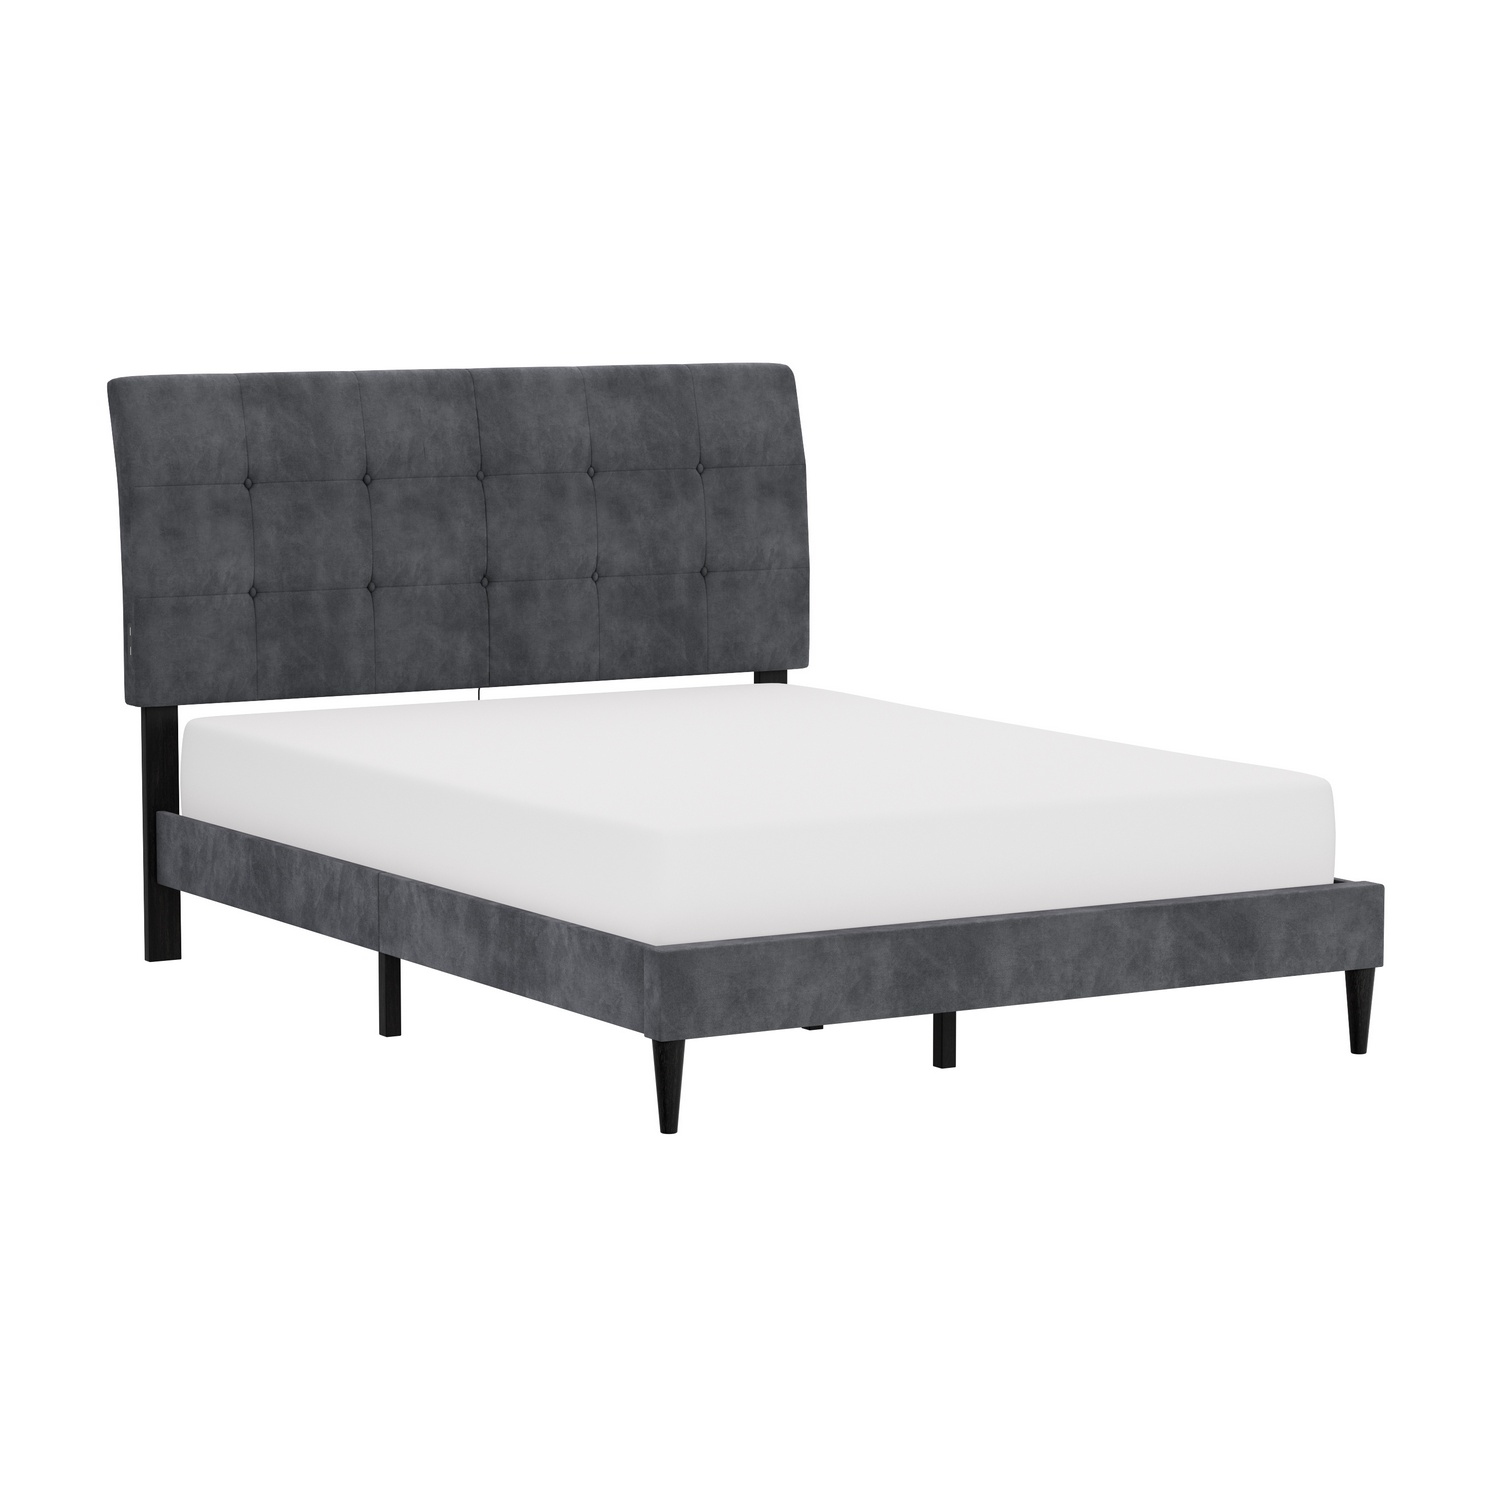 Hillsdale Blakely Button Tufted Upholstered Platform Bed with 2 Dual USB Ports - Dark Gray